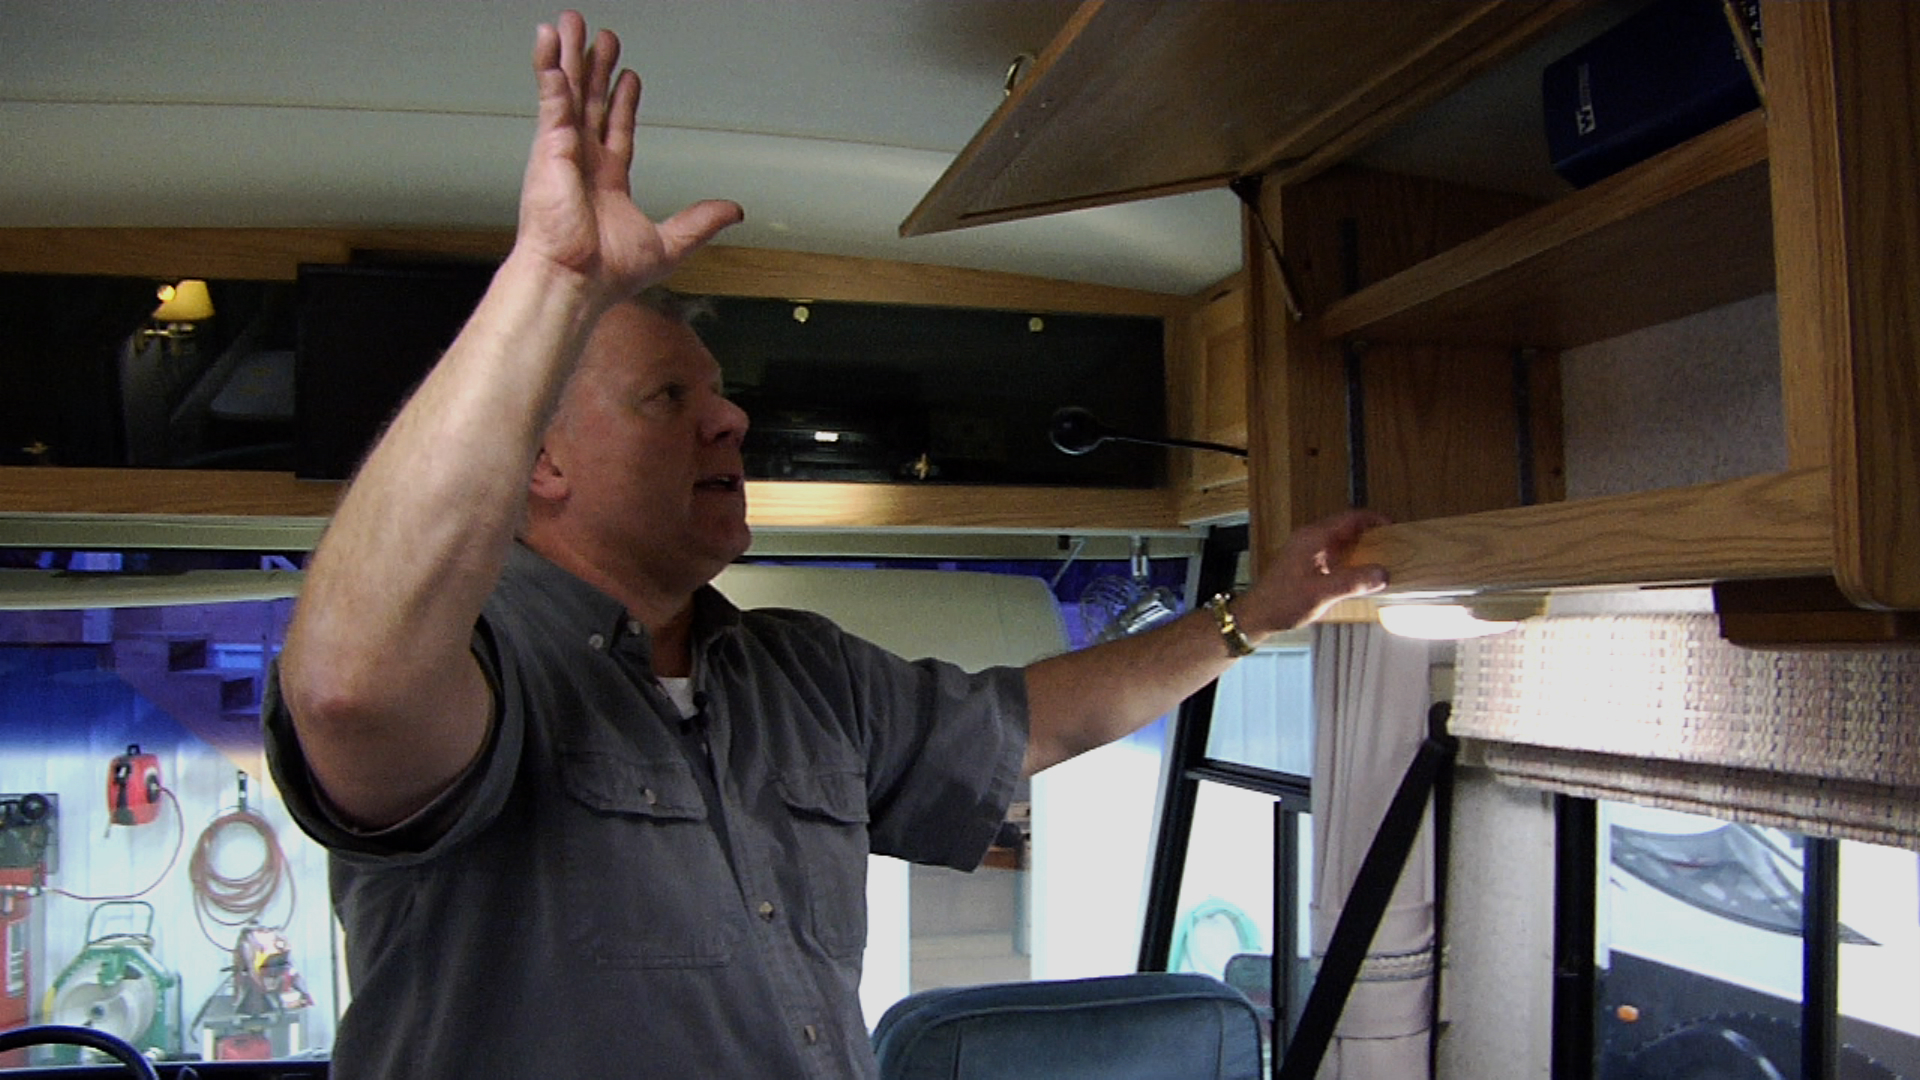 Buying a Used RV: Interior Inspection product featured image thumbnail.